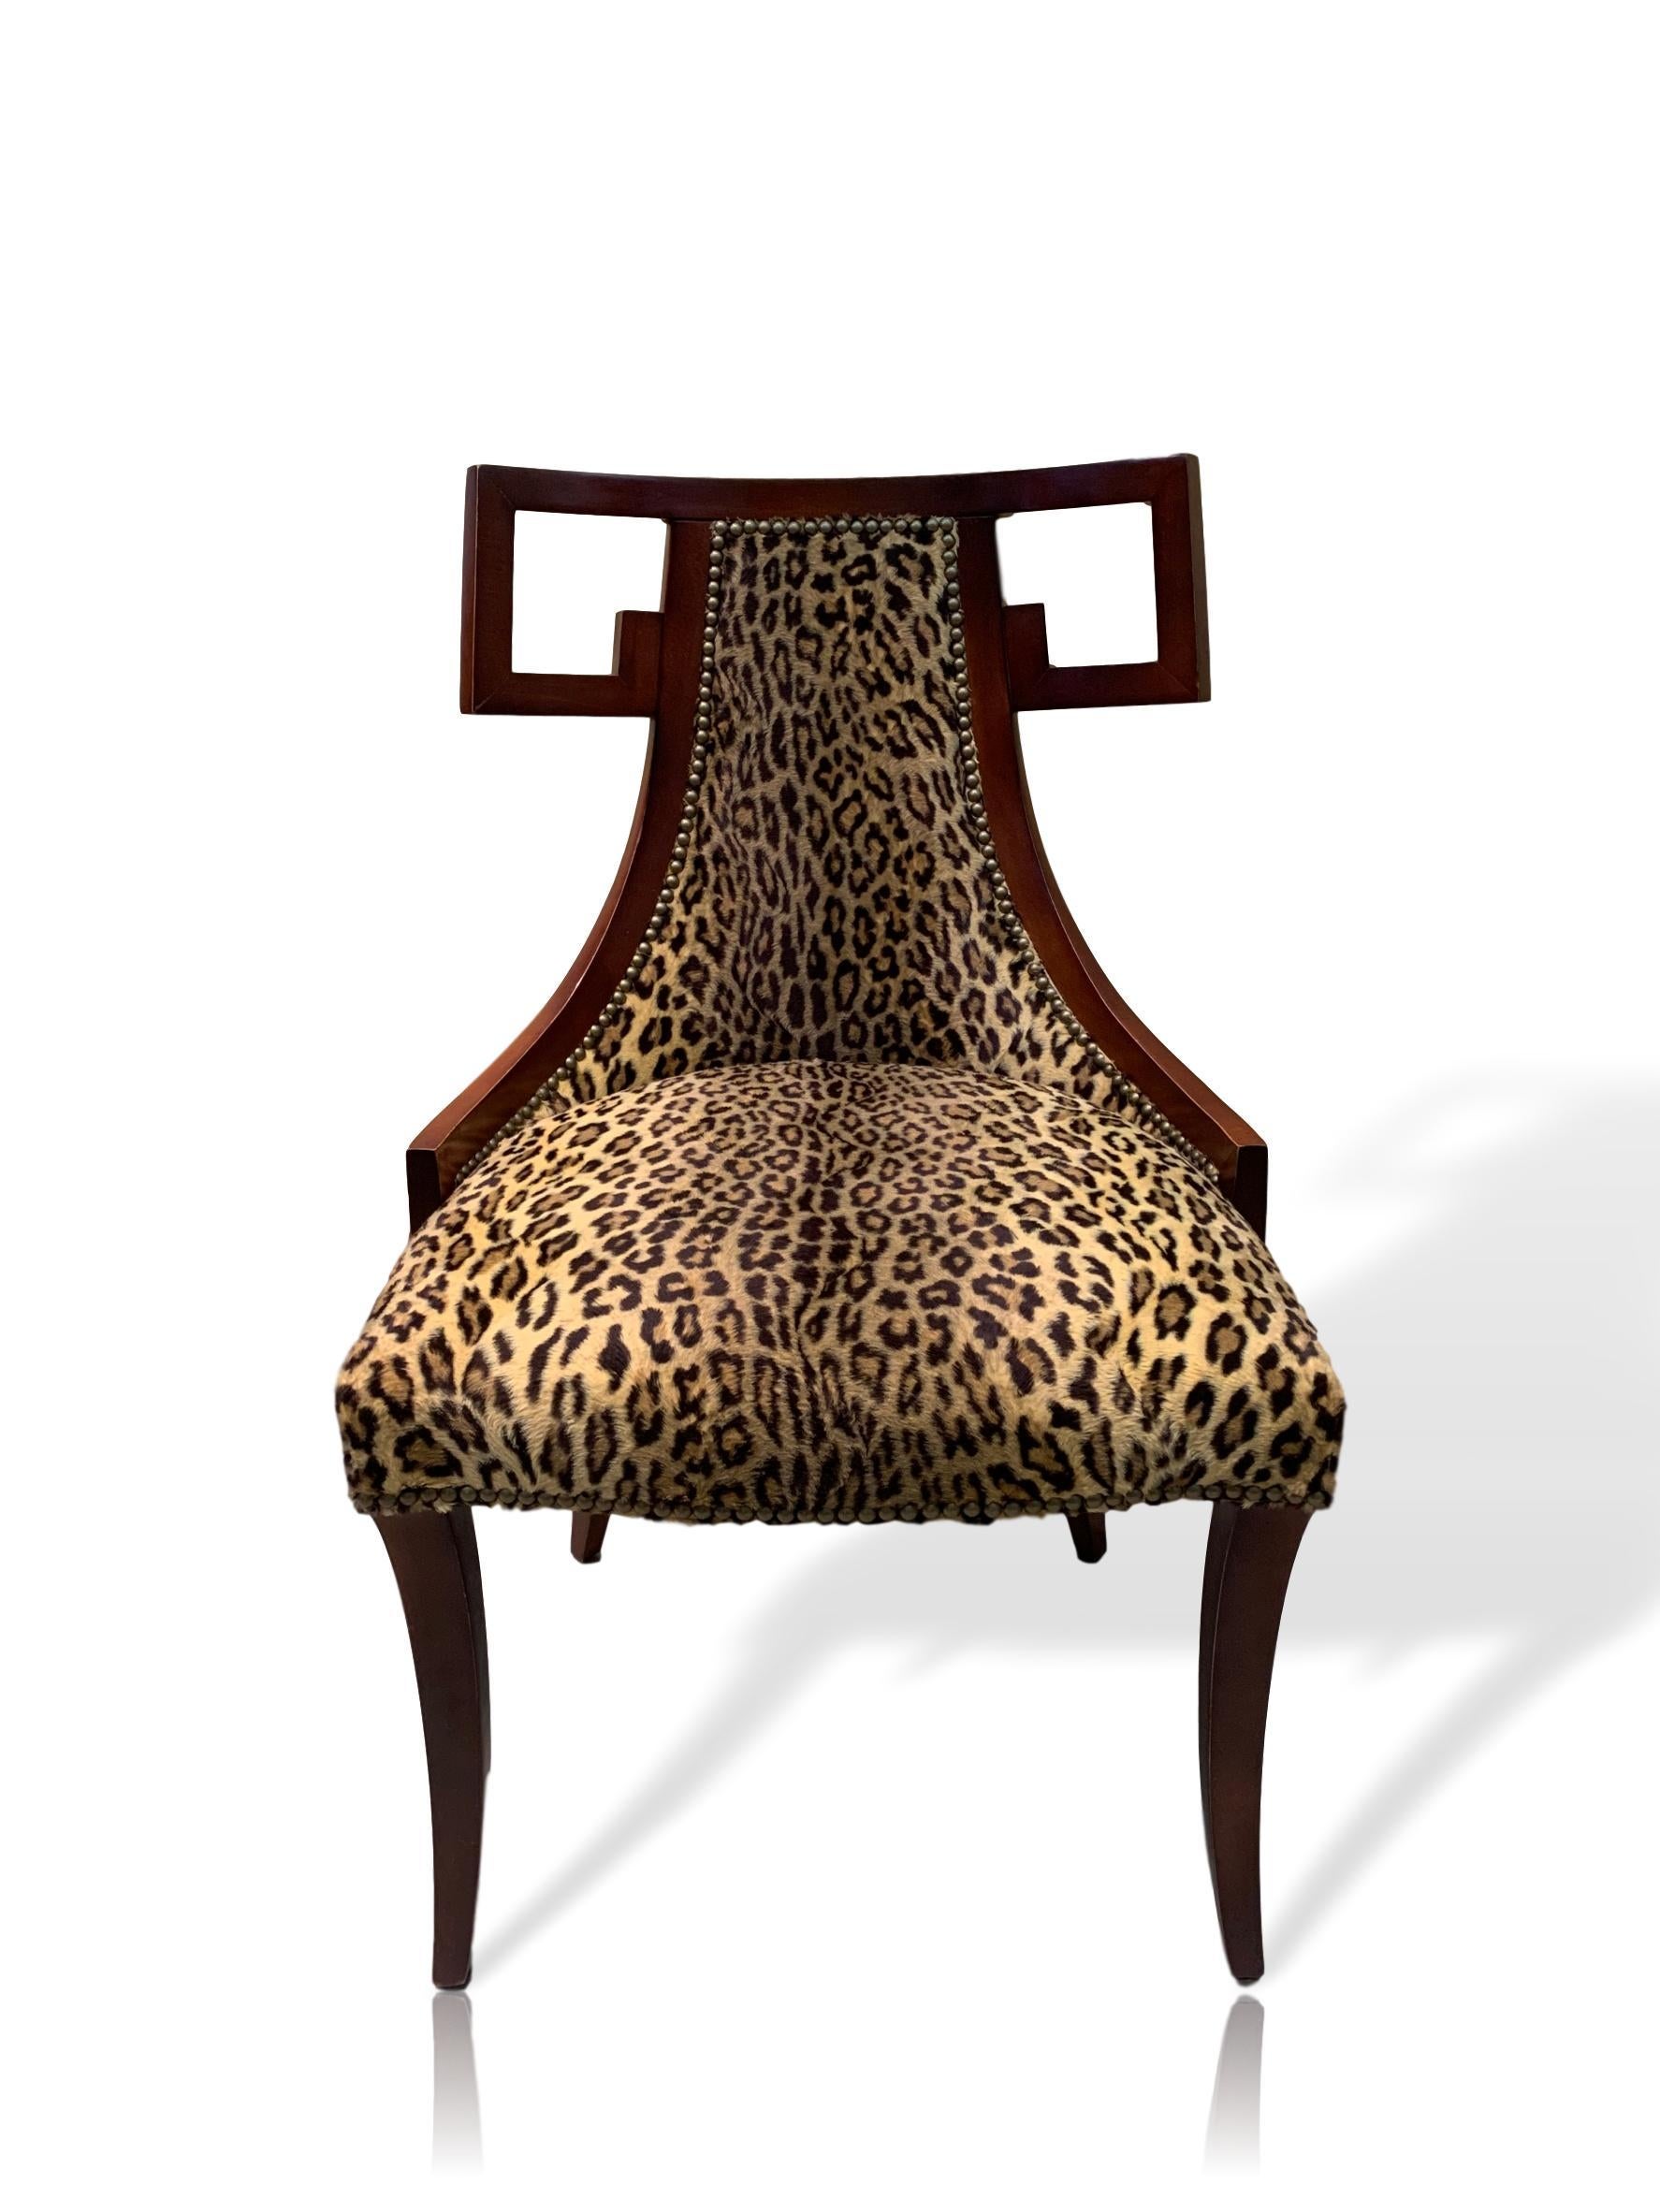 Pair of Baker Greek Key chairs newly upholstered in Ralph Lauren leopard fabric, Baker model number 7849, designed by Thomas Peasant for Baker Furniture, the most prestigious, high-quality furniture maker in the nation. Very heavy, solid hard maple